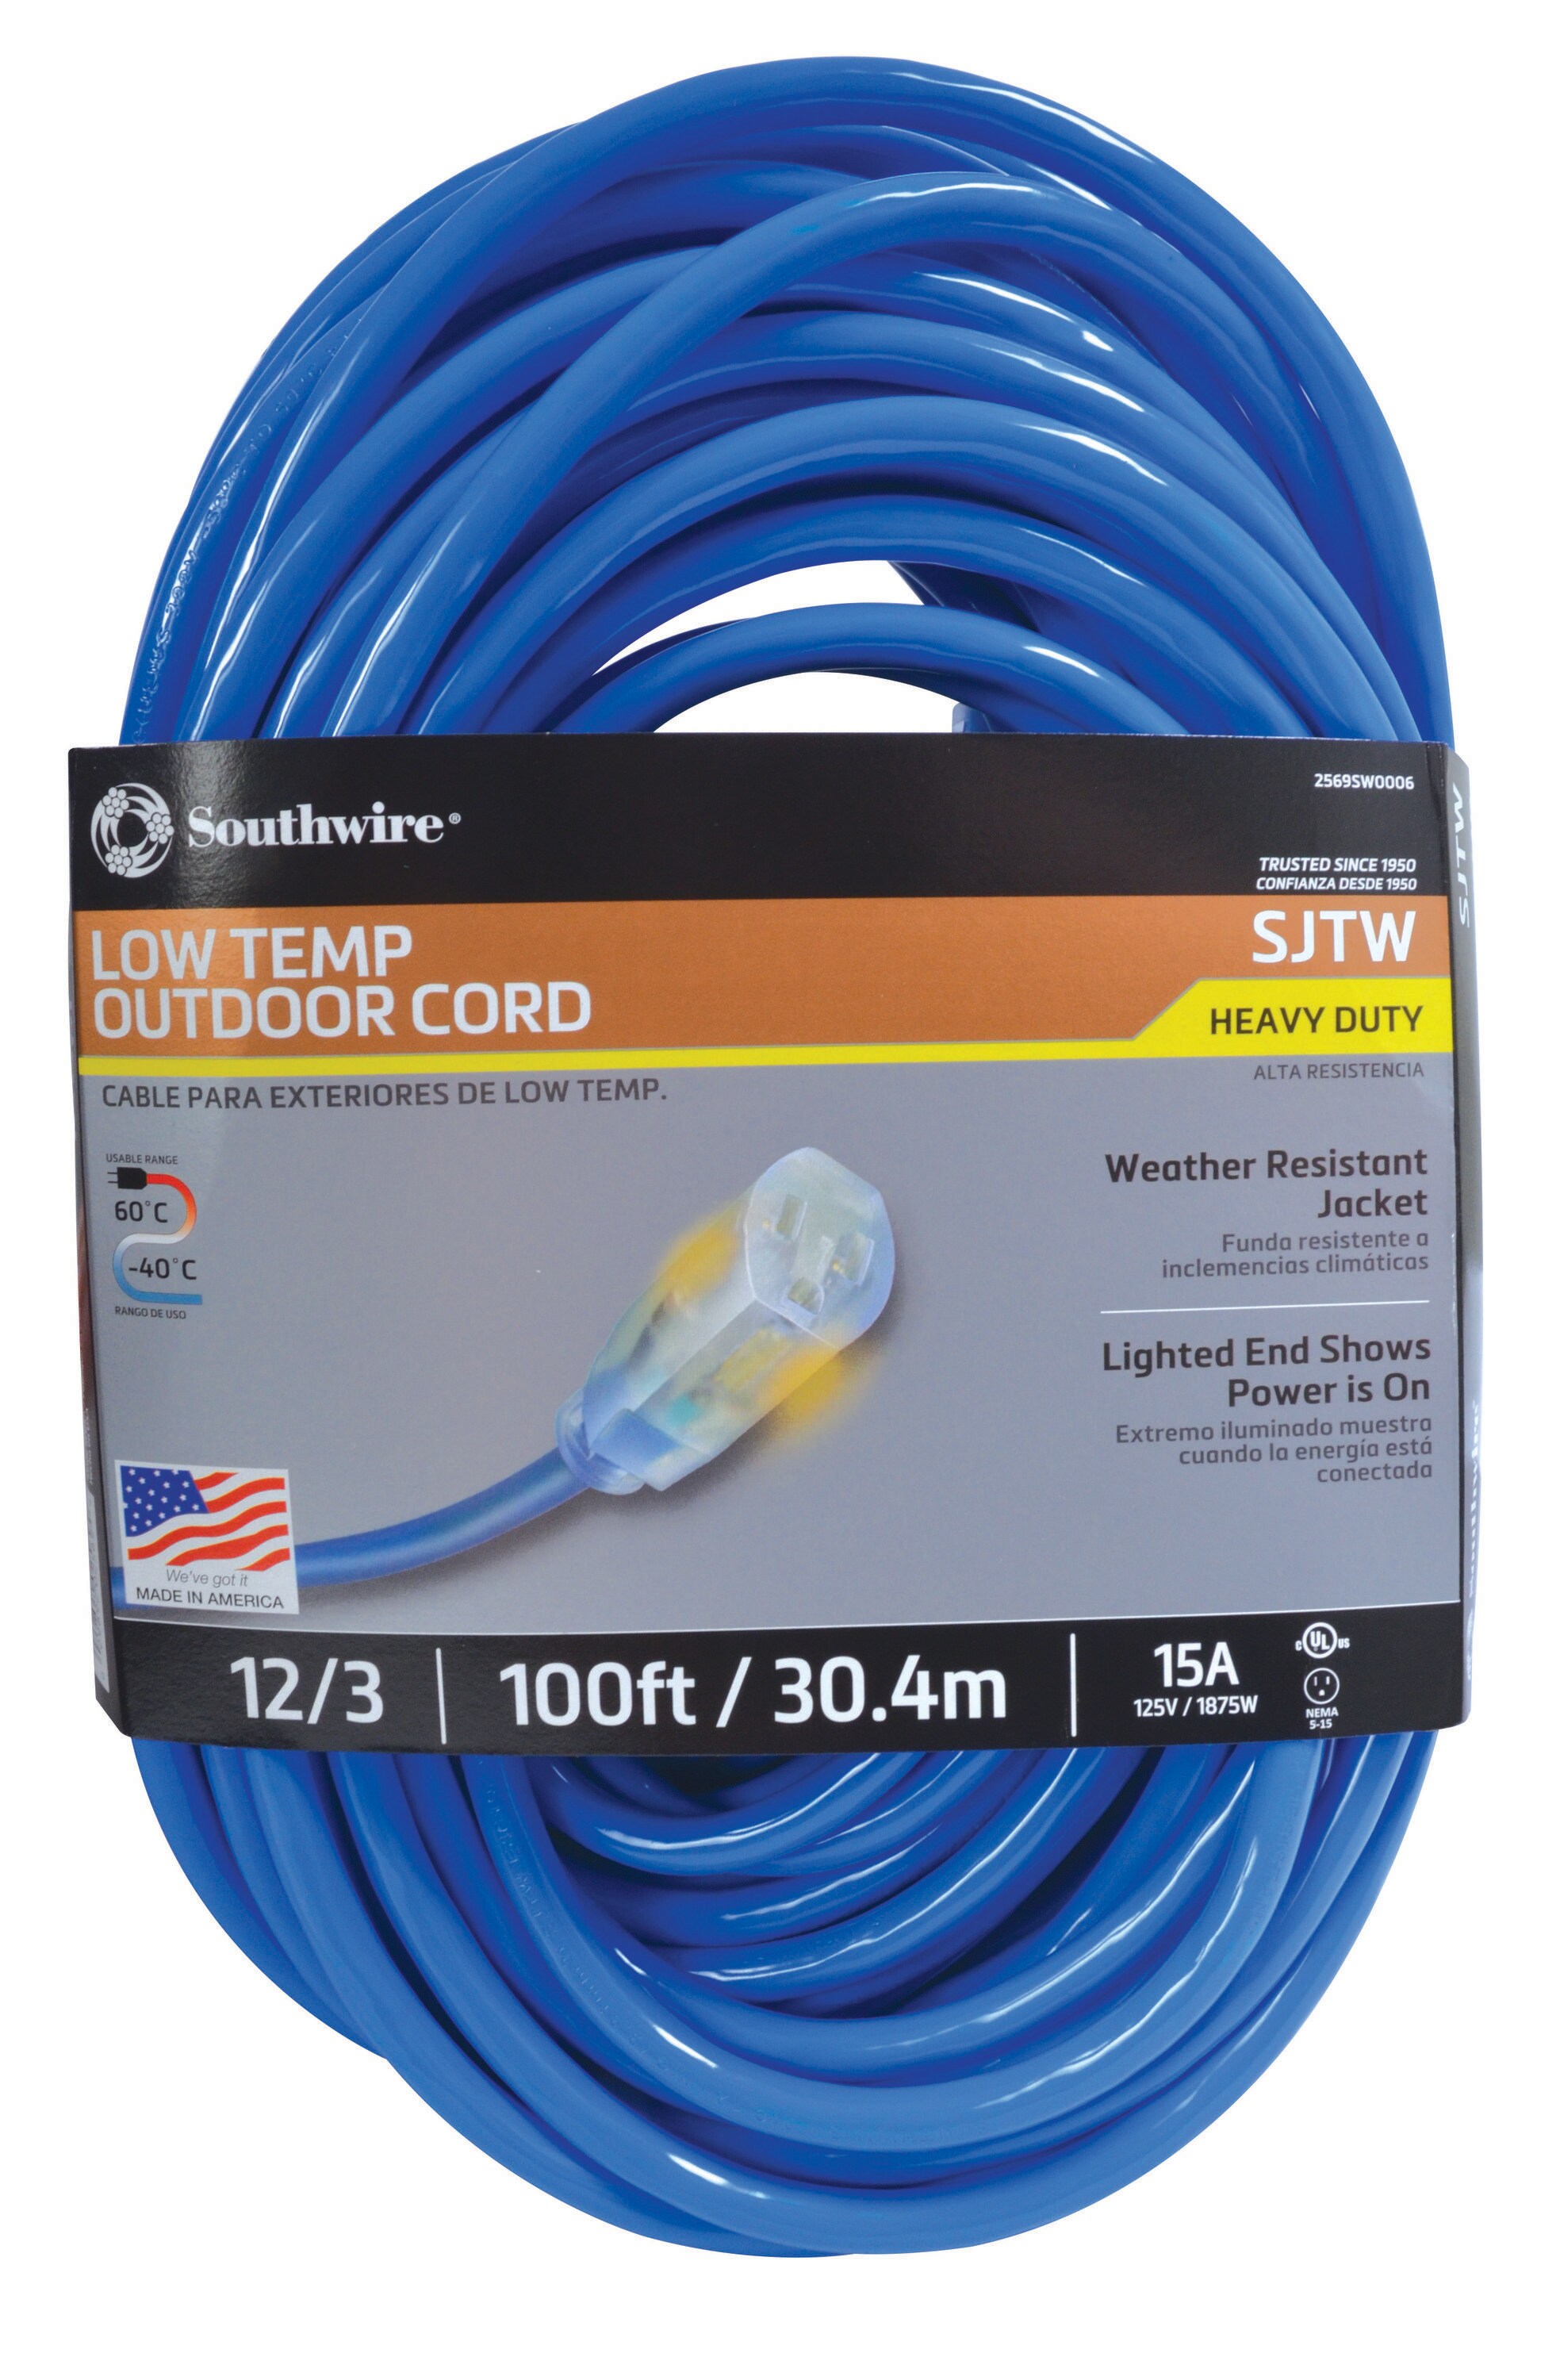 12 3 100ft In/Outdr 100' 12/3 Lighted Heavy Duty 3 Outlet SJTW Extension Cord 